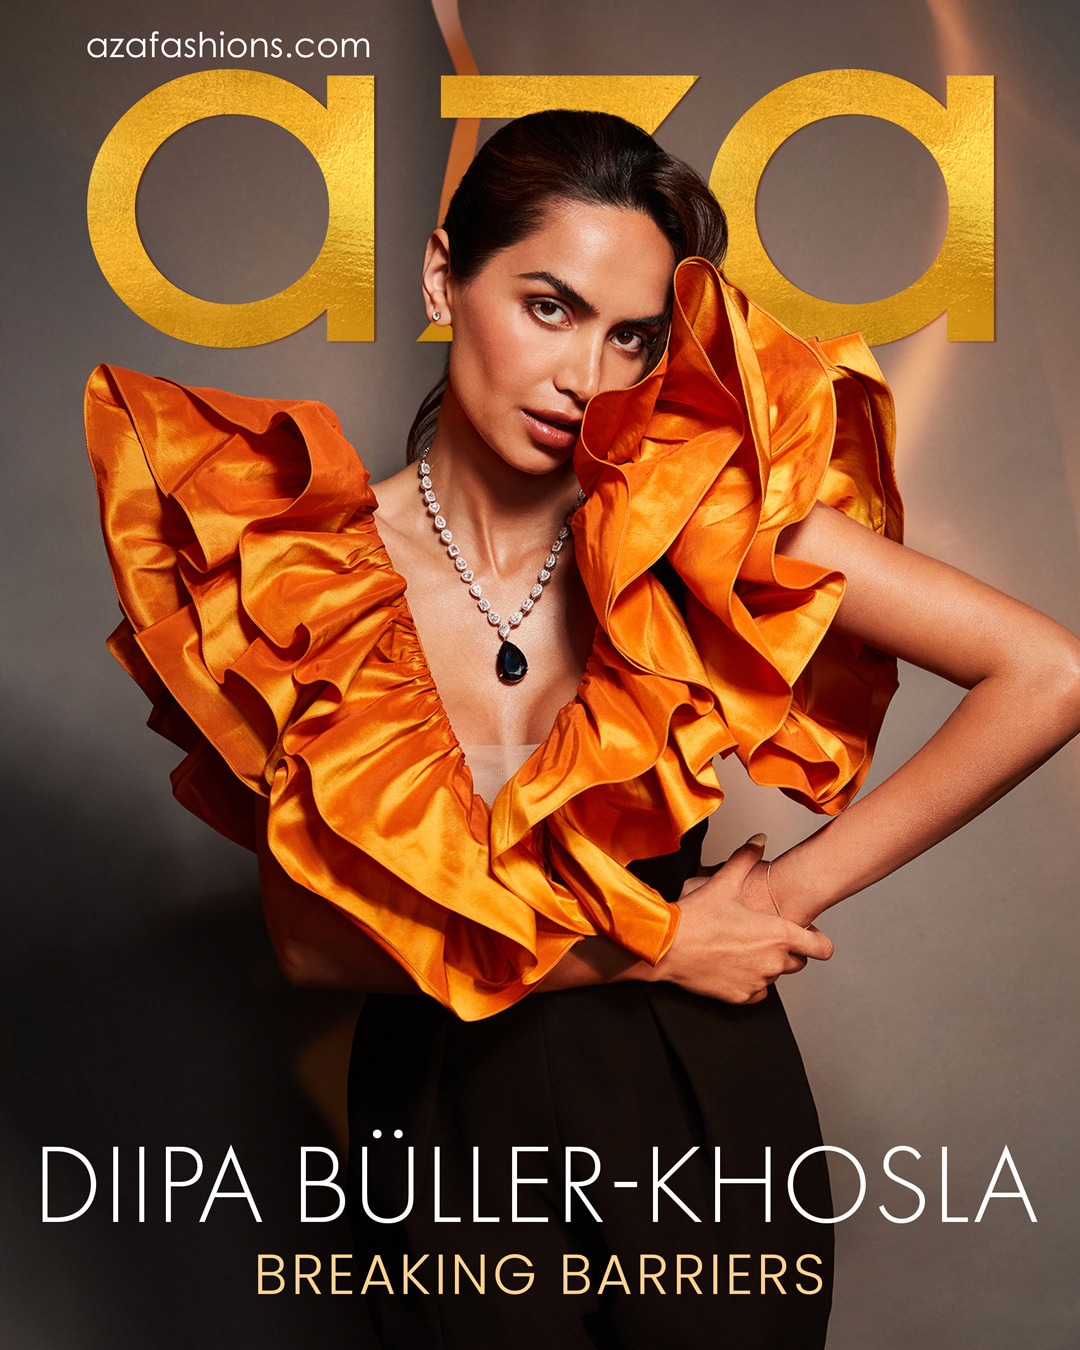 Shilpa Shetty Open Boobs - Diipa BÃ¼ller-Khosla Aza Cover Story | Read Exclusive Celebrity Cover  Stories at Aza Fashions